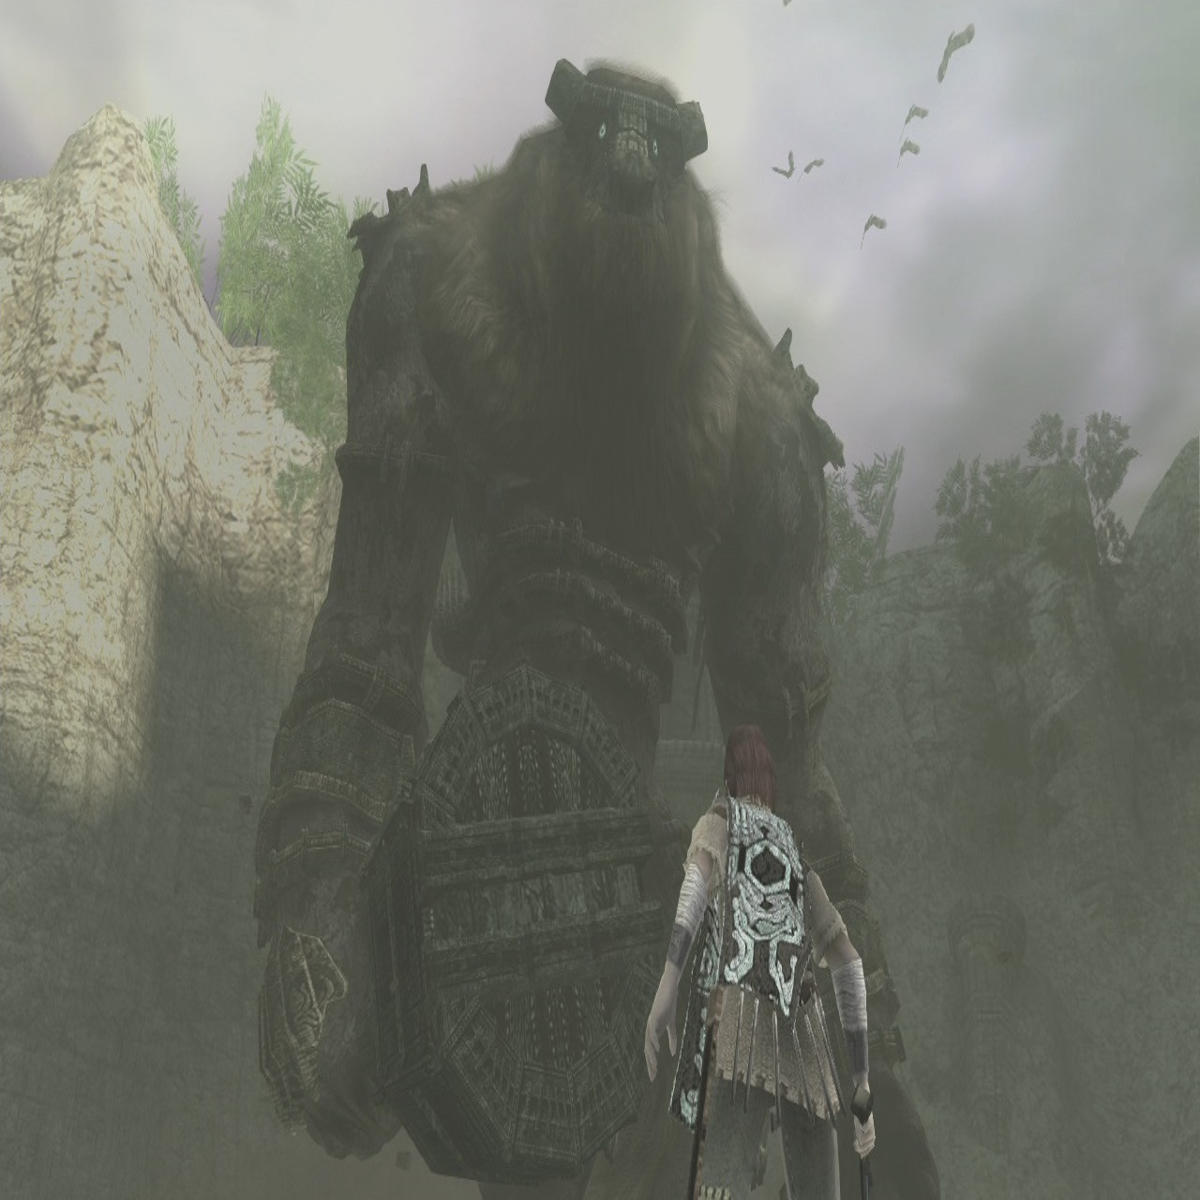 Shadow of the Colossus on PS4 is a remake, not a remaster, says